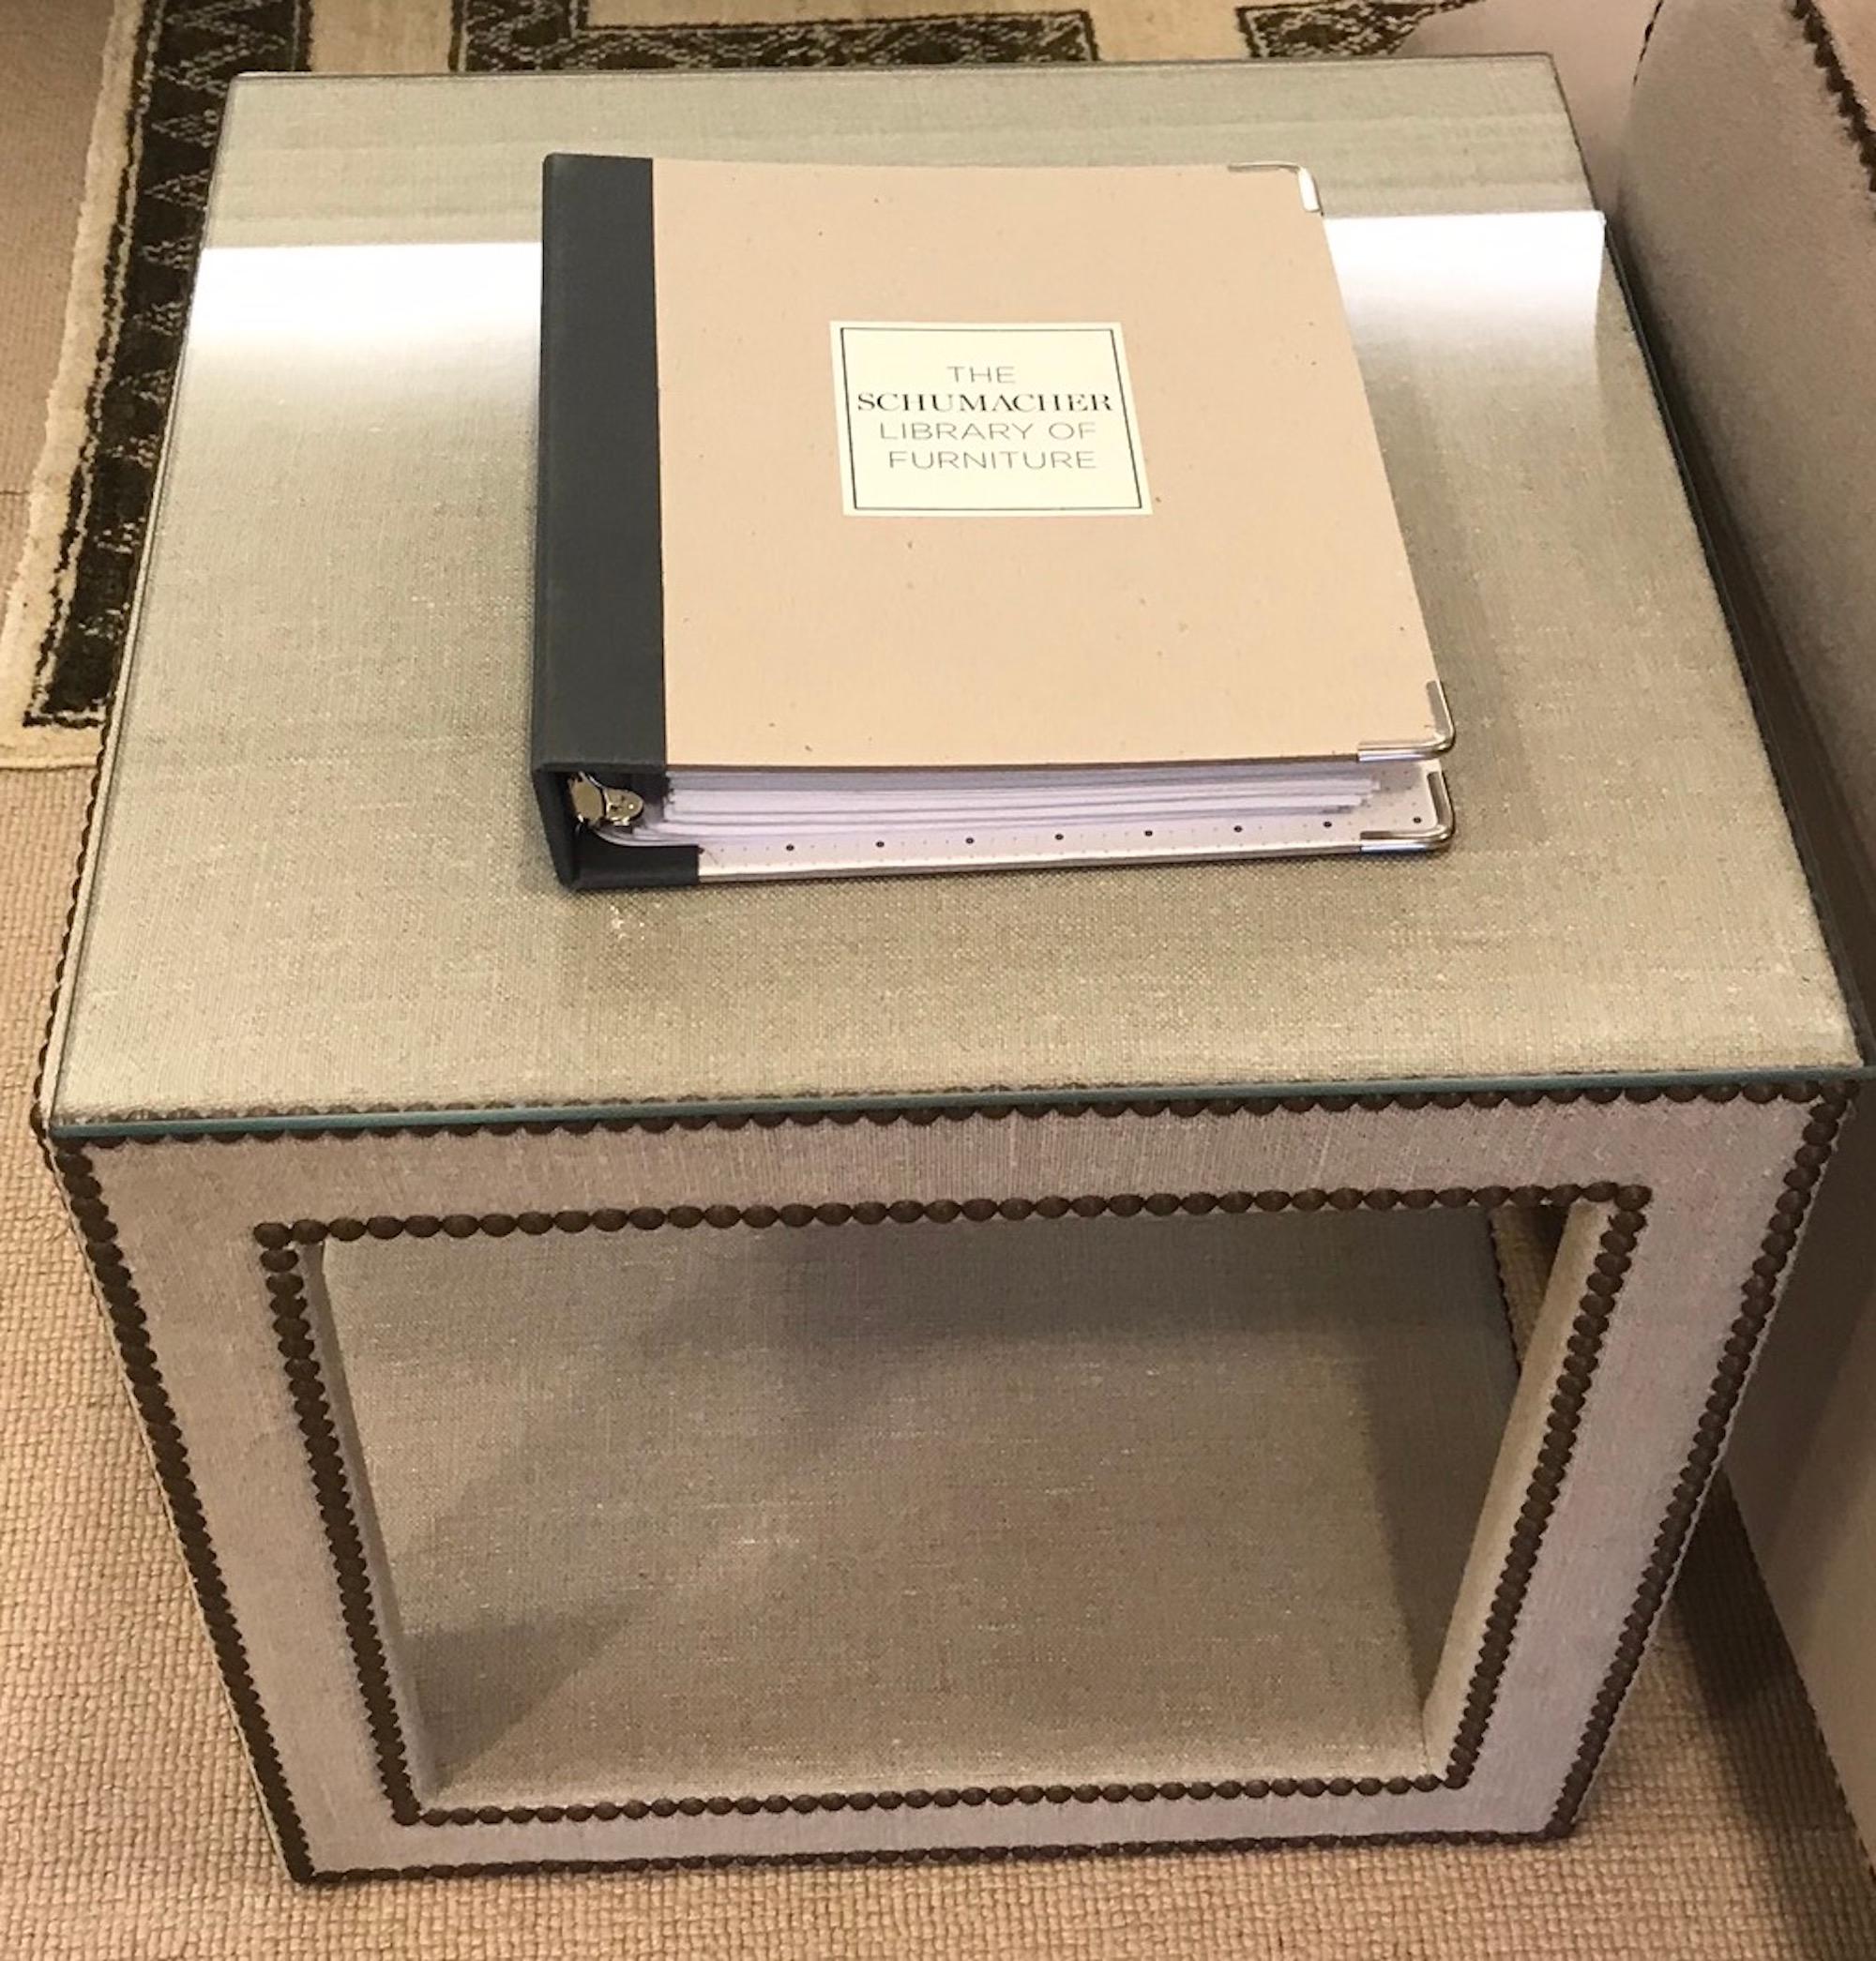 The Baldwin Cube is composed of a hardwood frame that is fully upholstered in Gweneth Linen Schumacher fabric in linen and is finished with nailhead detailing around the edges and side of the piece. It functions as a chic side table or accessory